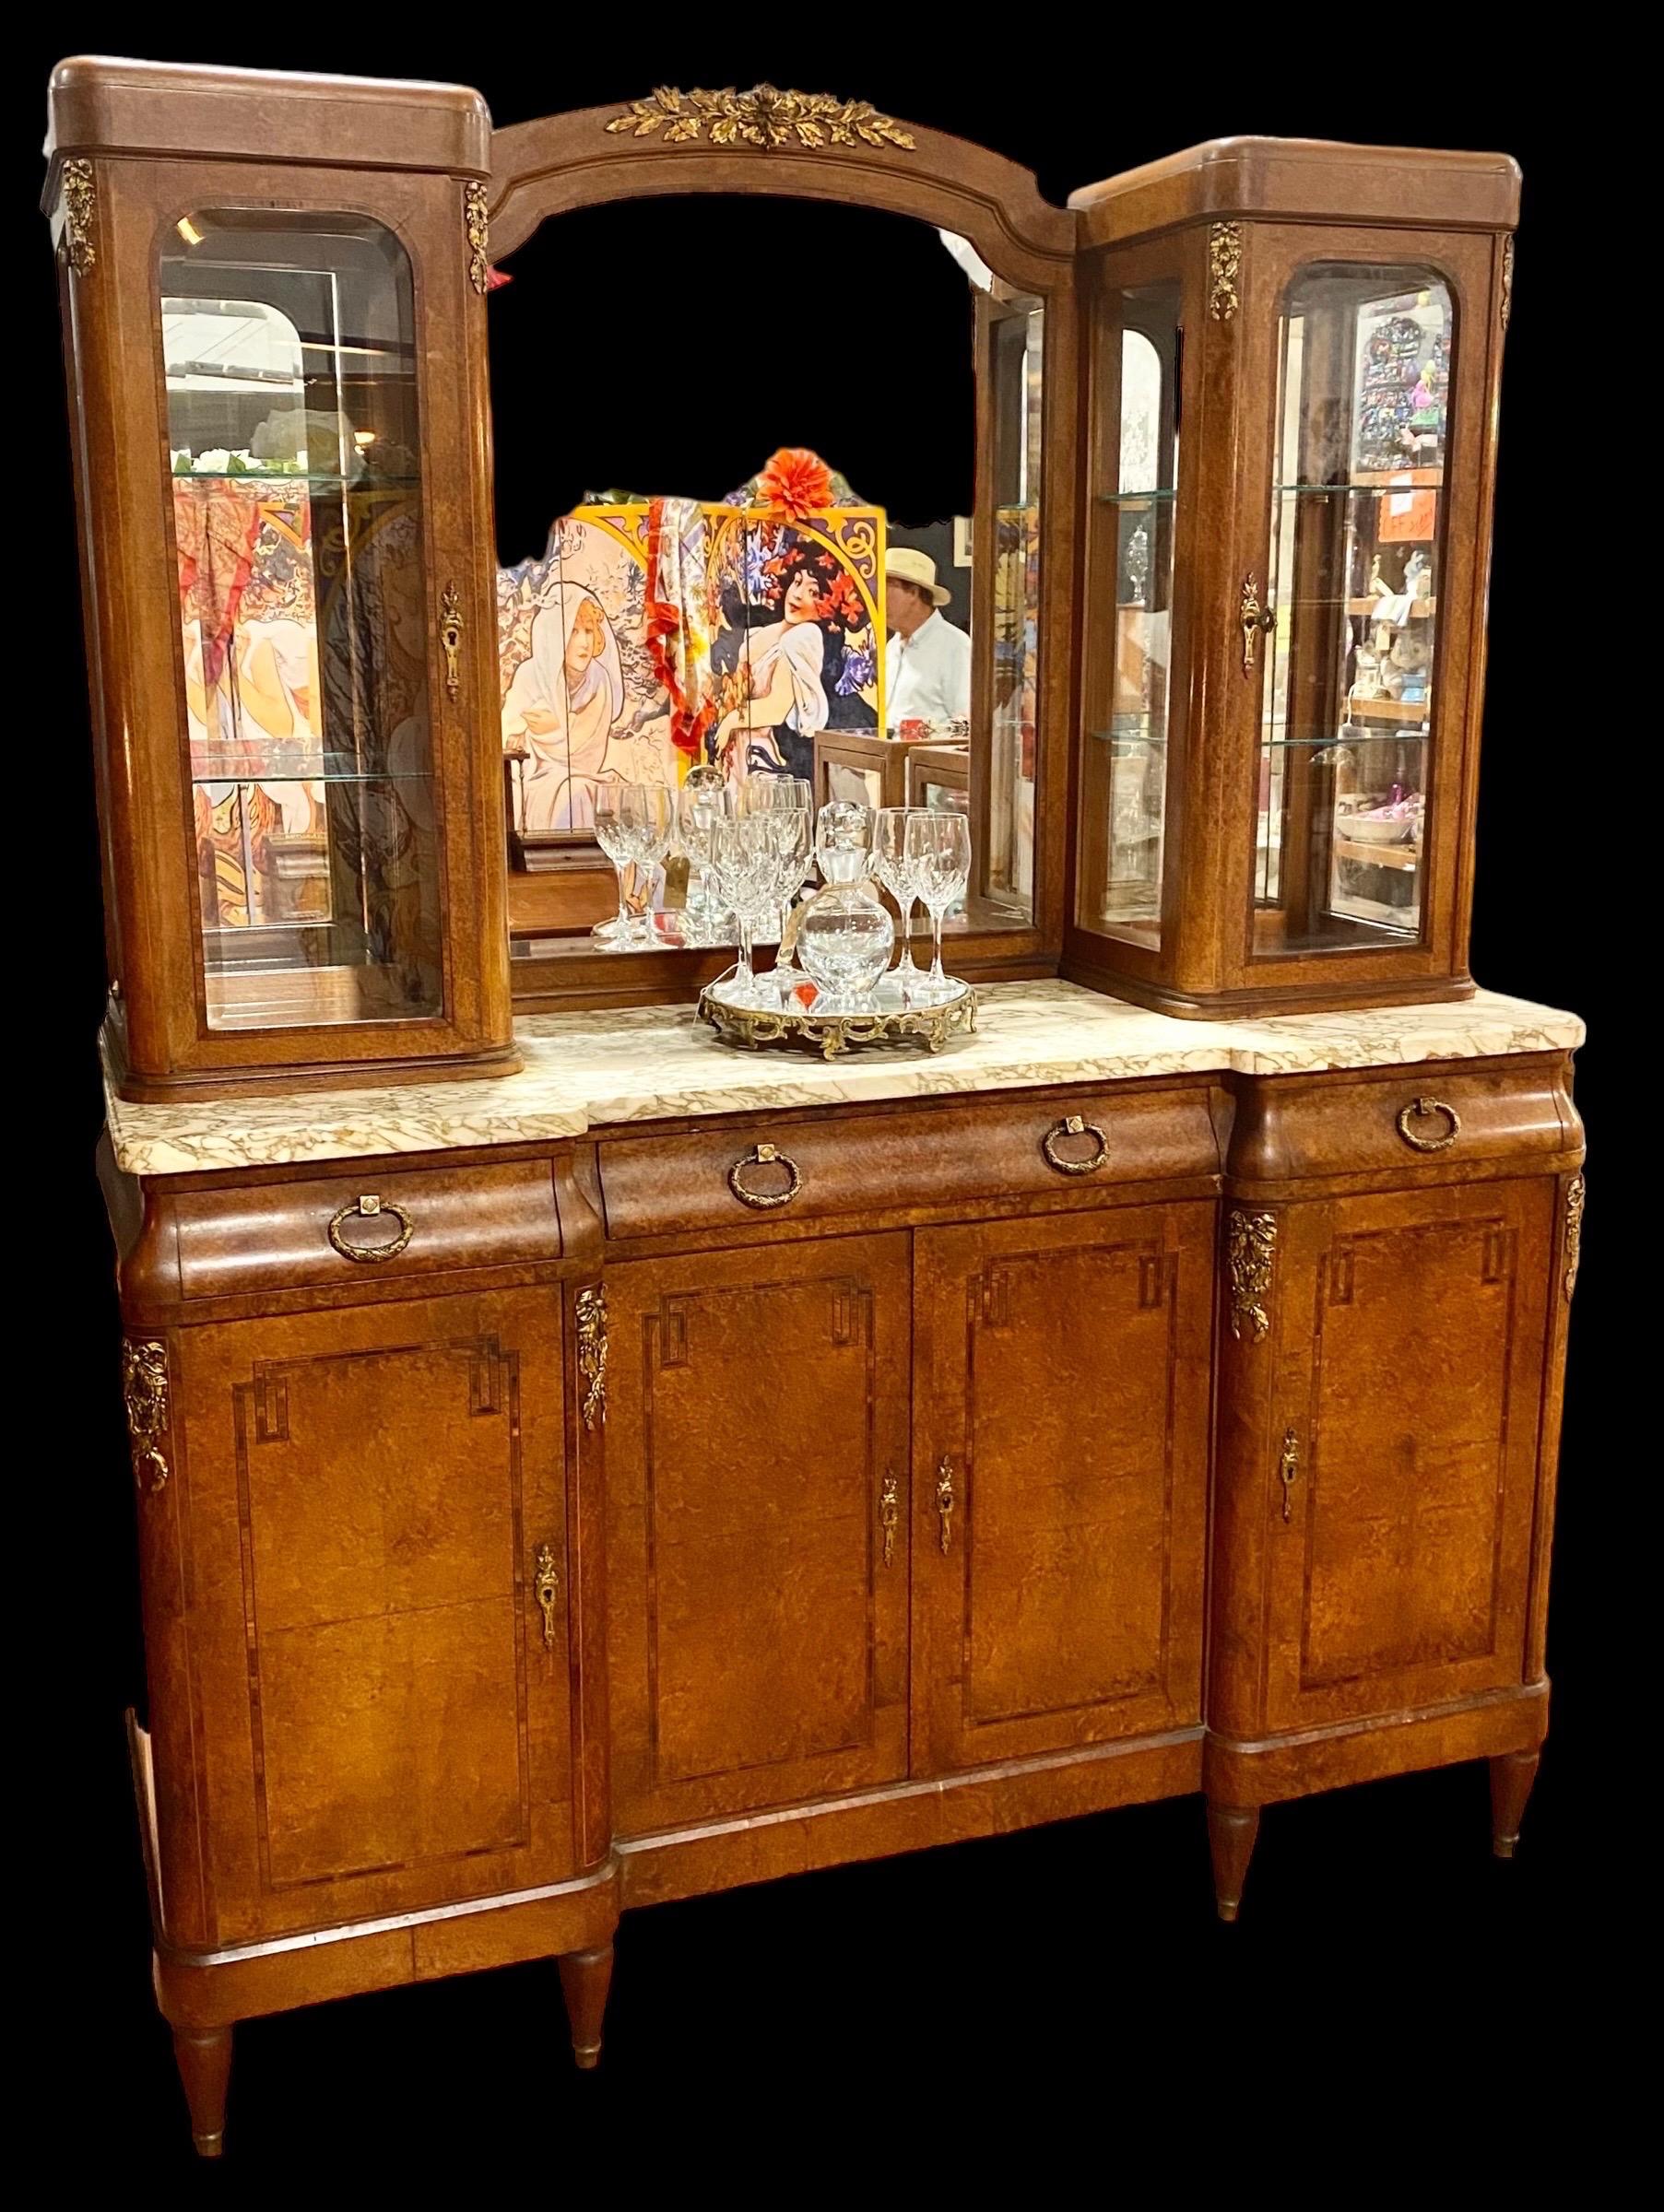 20th Century Antique French Beaux Arts Inlaid Bird’S-Eye Maple and Marble Sideboard/Bar